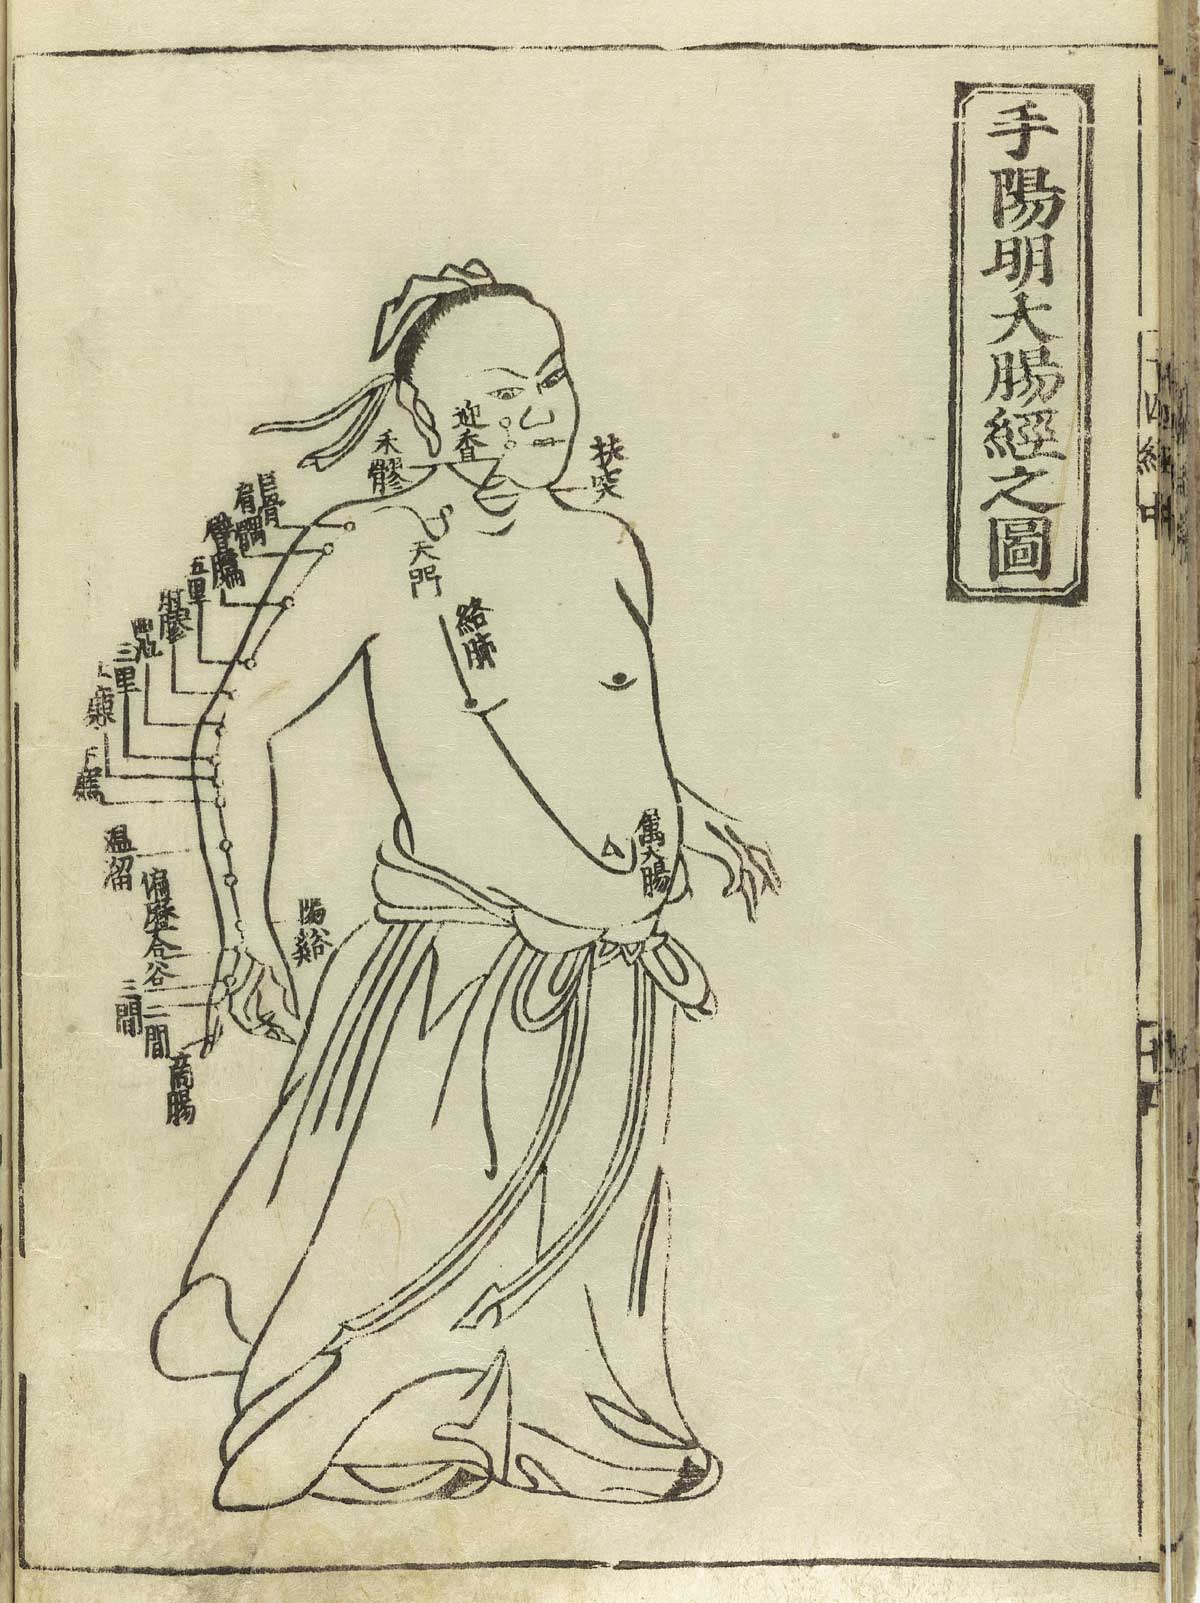 Woodcut showing the Yangming large intestine meridian of hand of a standing male facing figure wearing a skirt with meridians indicated down the right arm and chest with Chinese characters giving names of the points, from Hua Shou’s Jushikei hakki, NLM Call no.: WZ 260 H868s 1716.